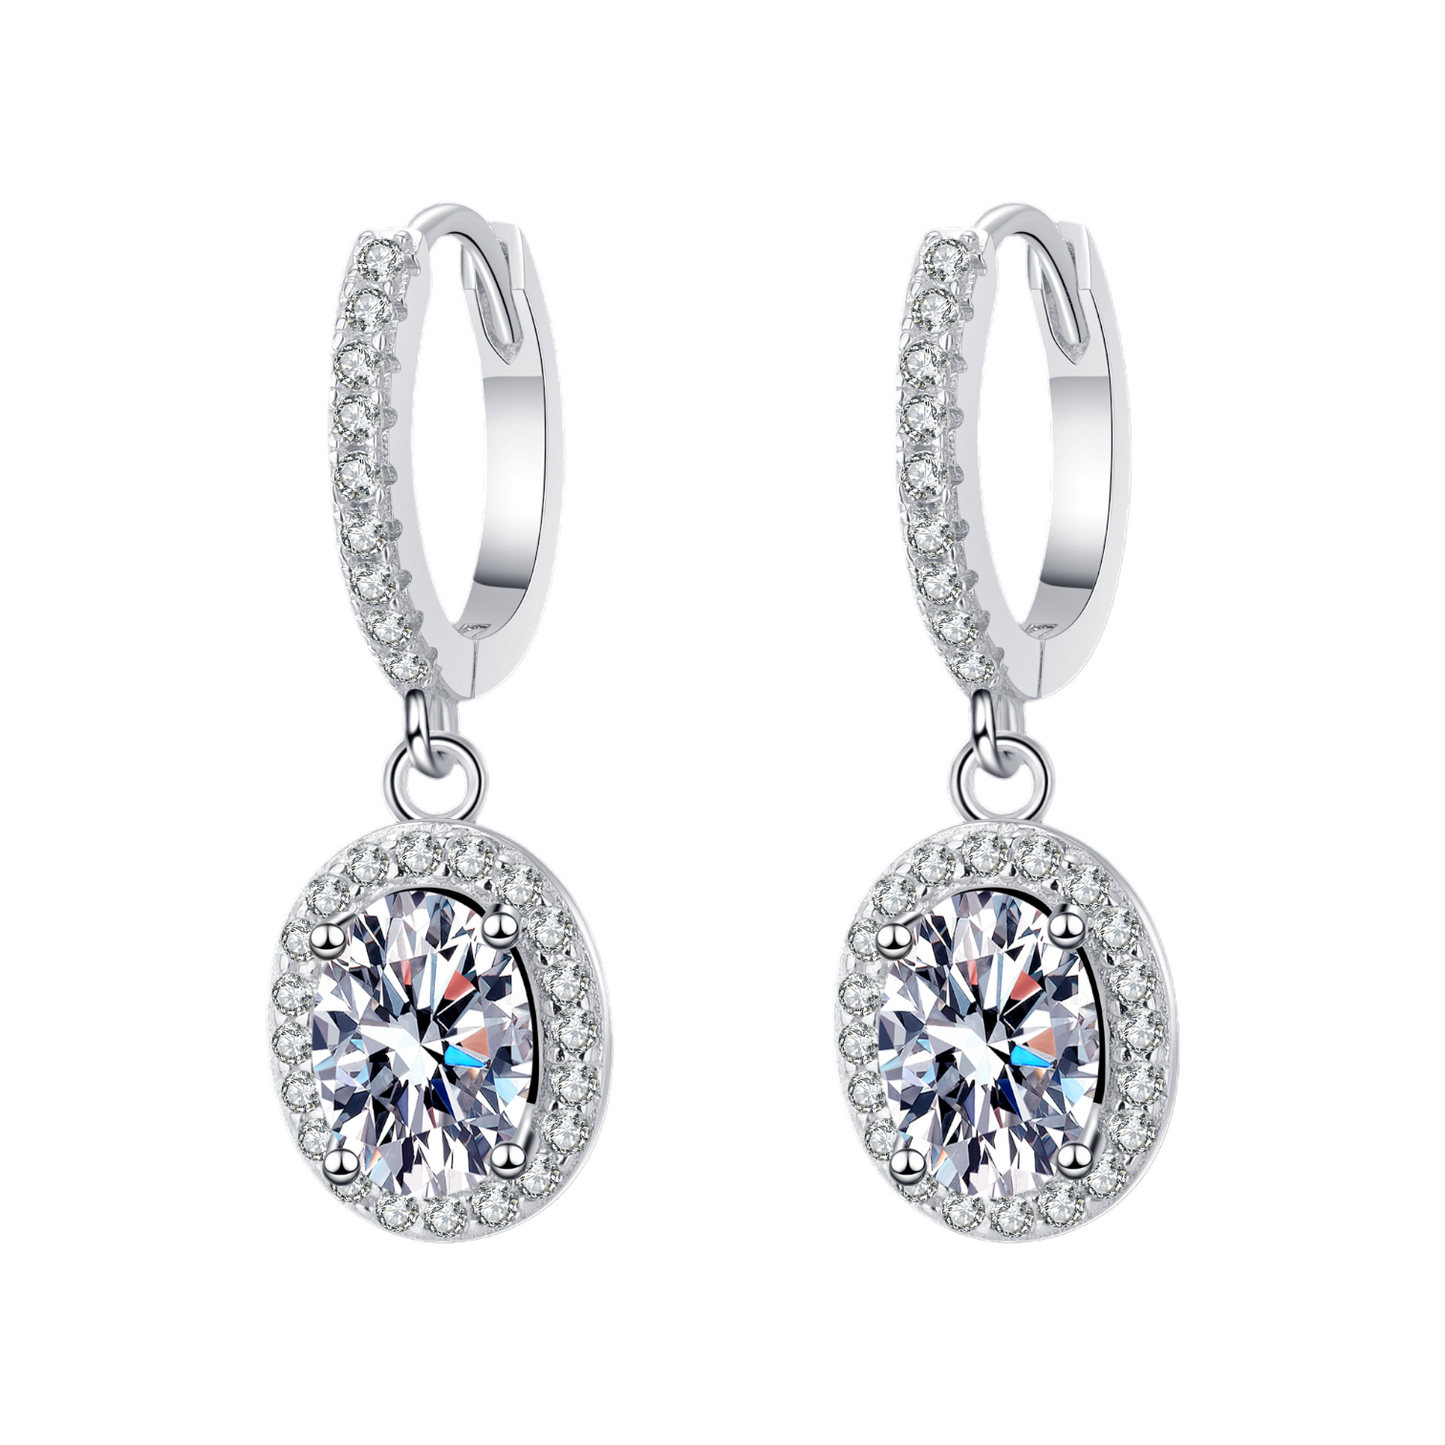 Beatrice's Dangles solitaire earring